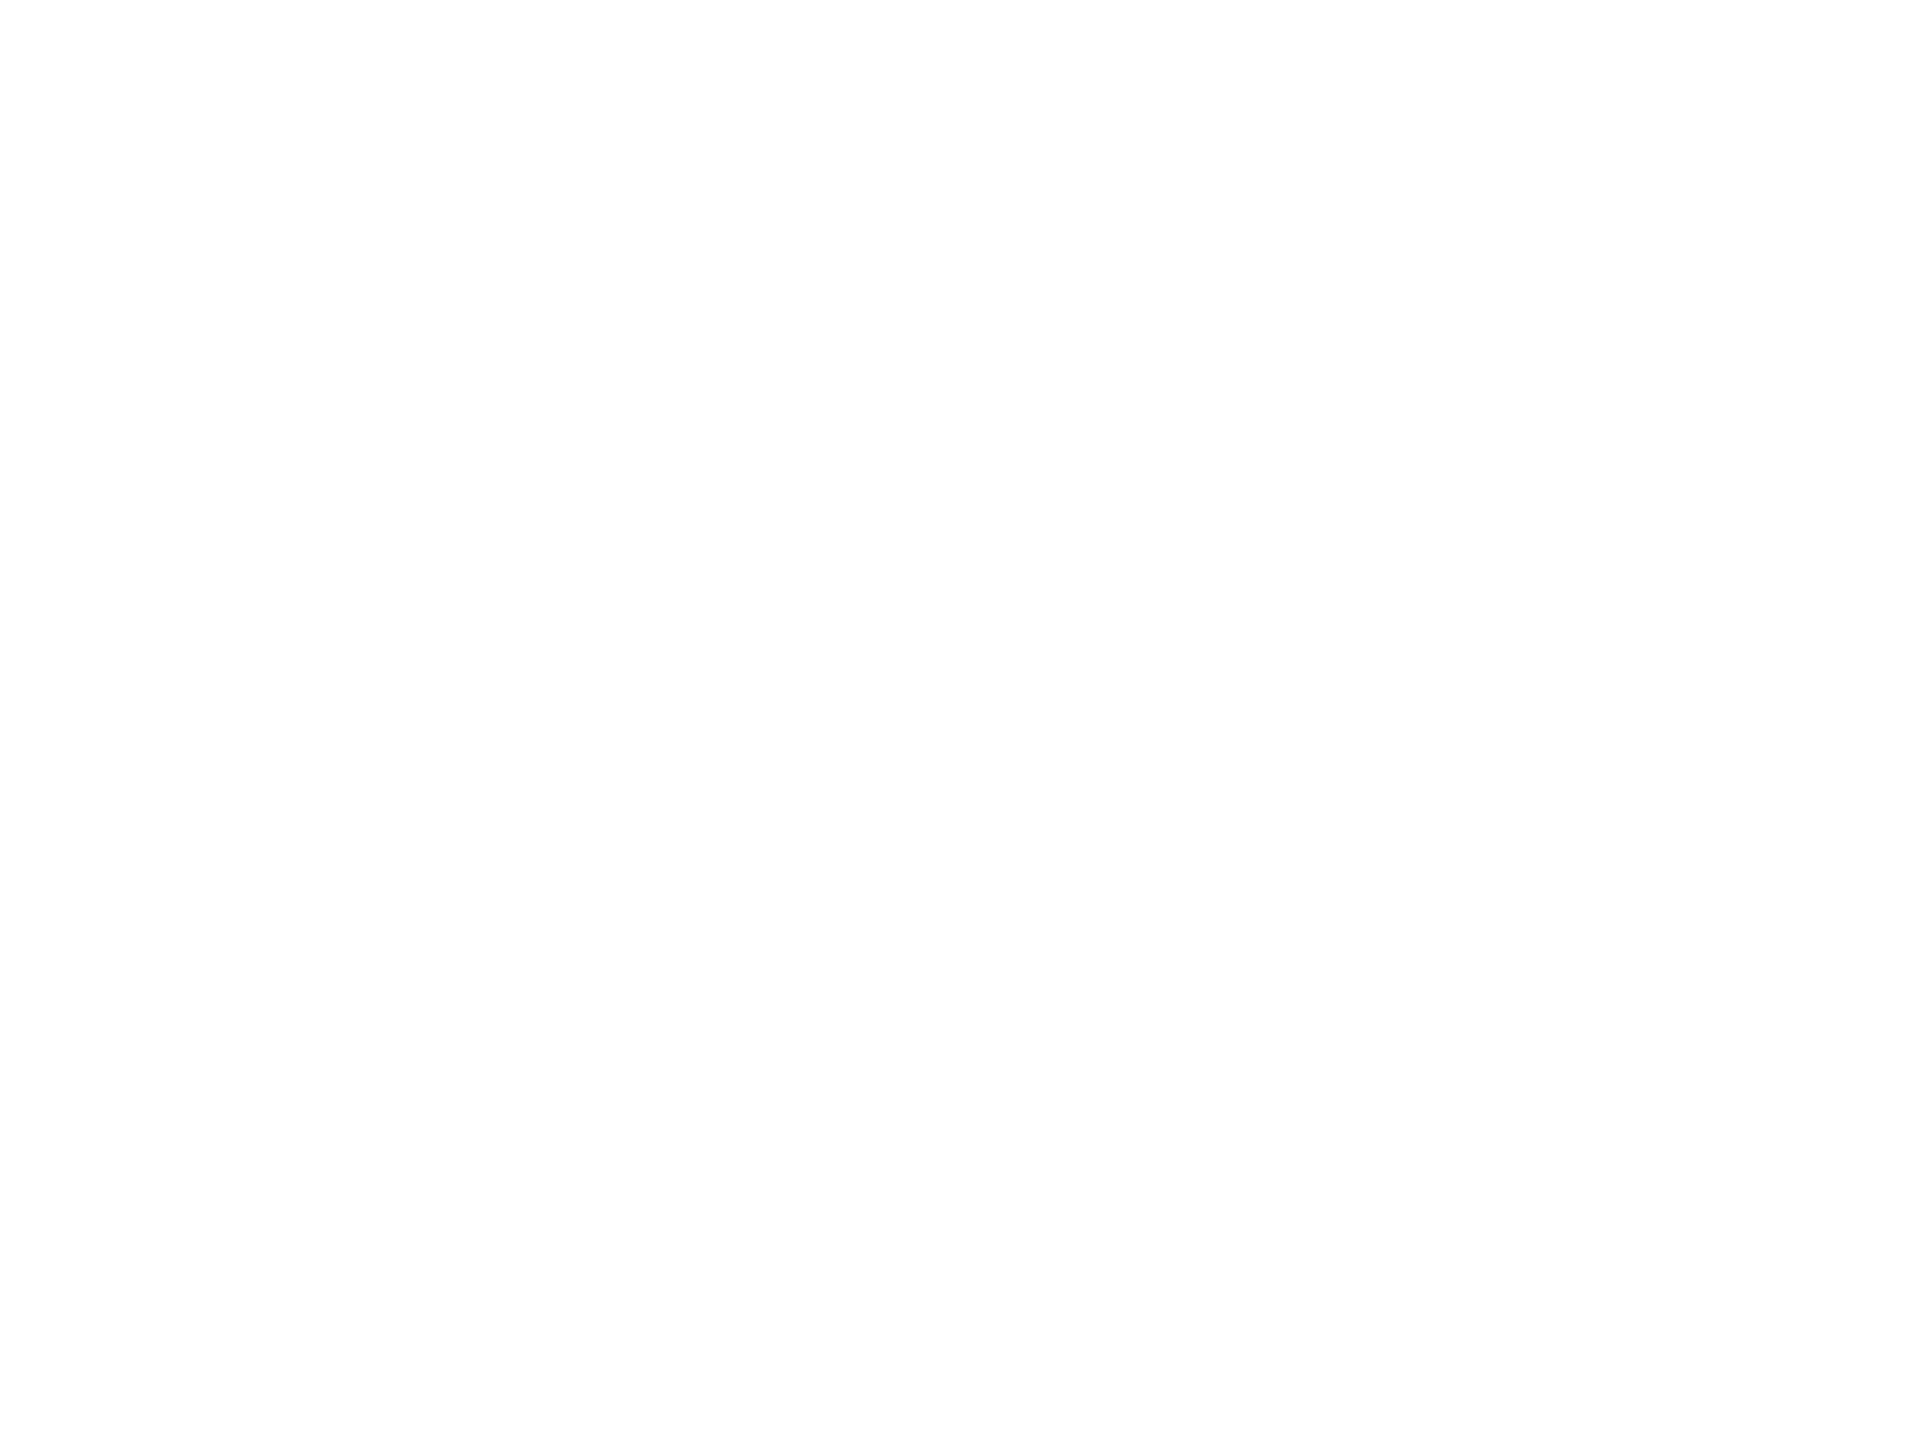 The Little Craft House